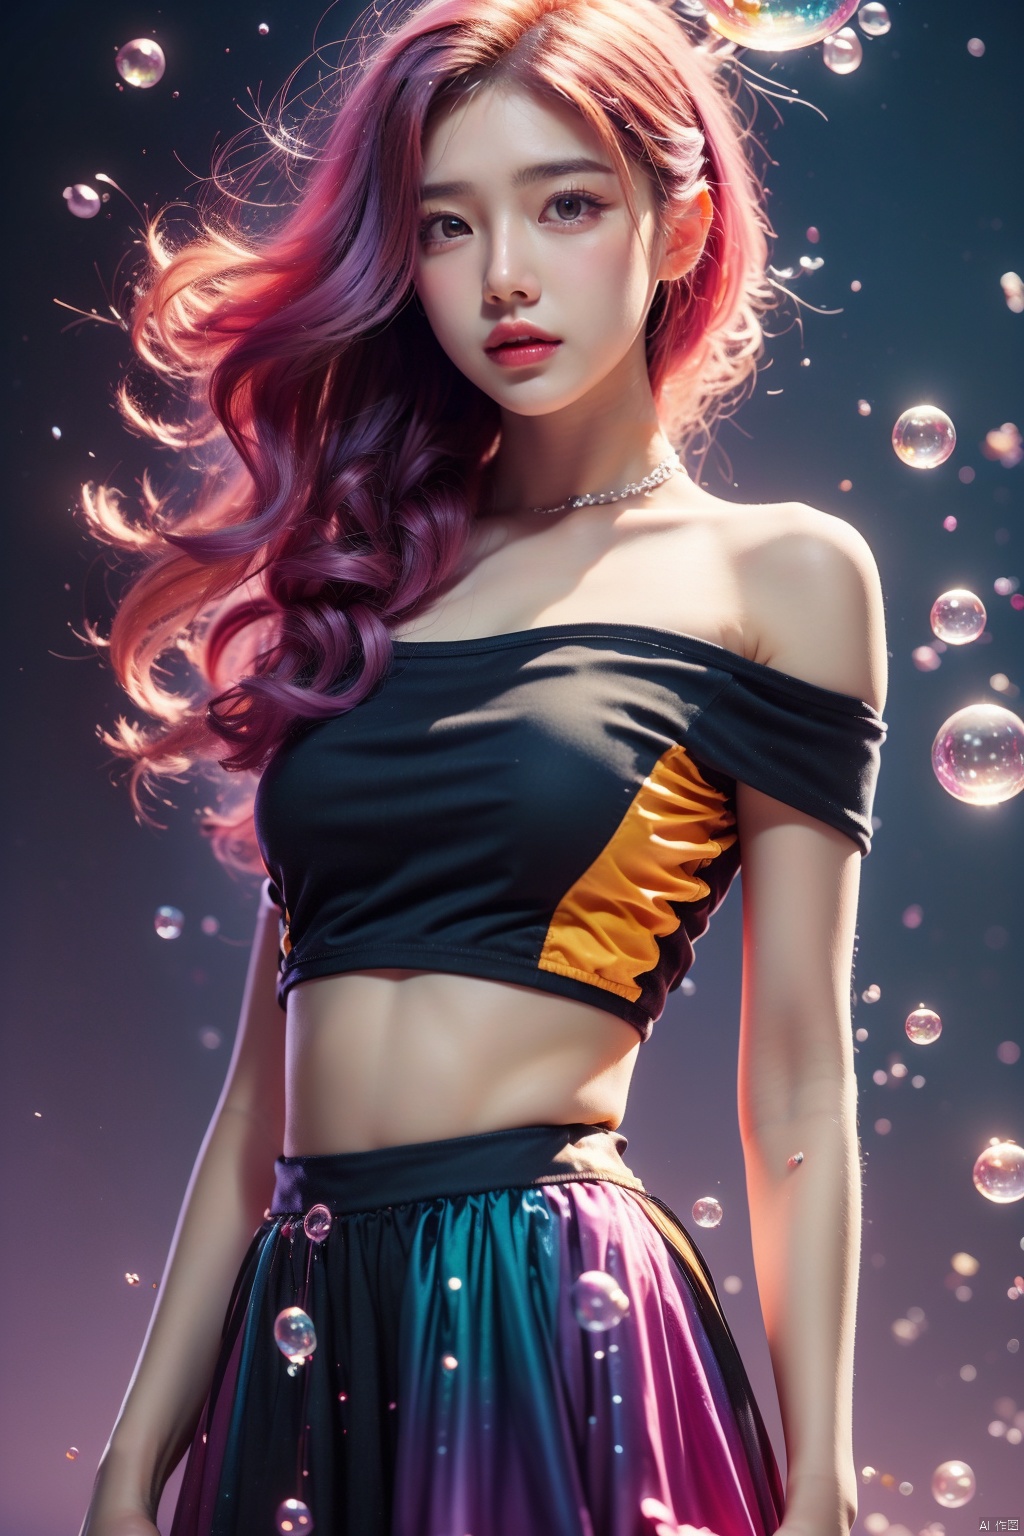 Color girl, 1 girl, color bubble, multi-color bubble, close-up, sideways, upper body, above hips, off-the-shoulder, tube top dress, black suspender, looking at the camera, short hair, purple gradient hair, gradient background, color bubble background, depth of field, hands, streamer, no hands.